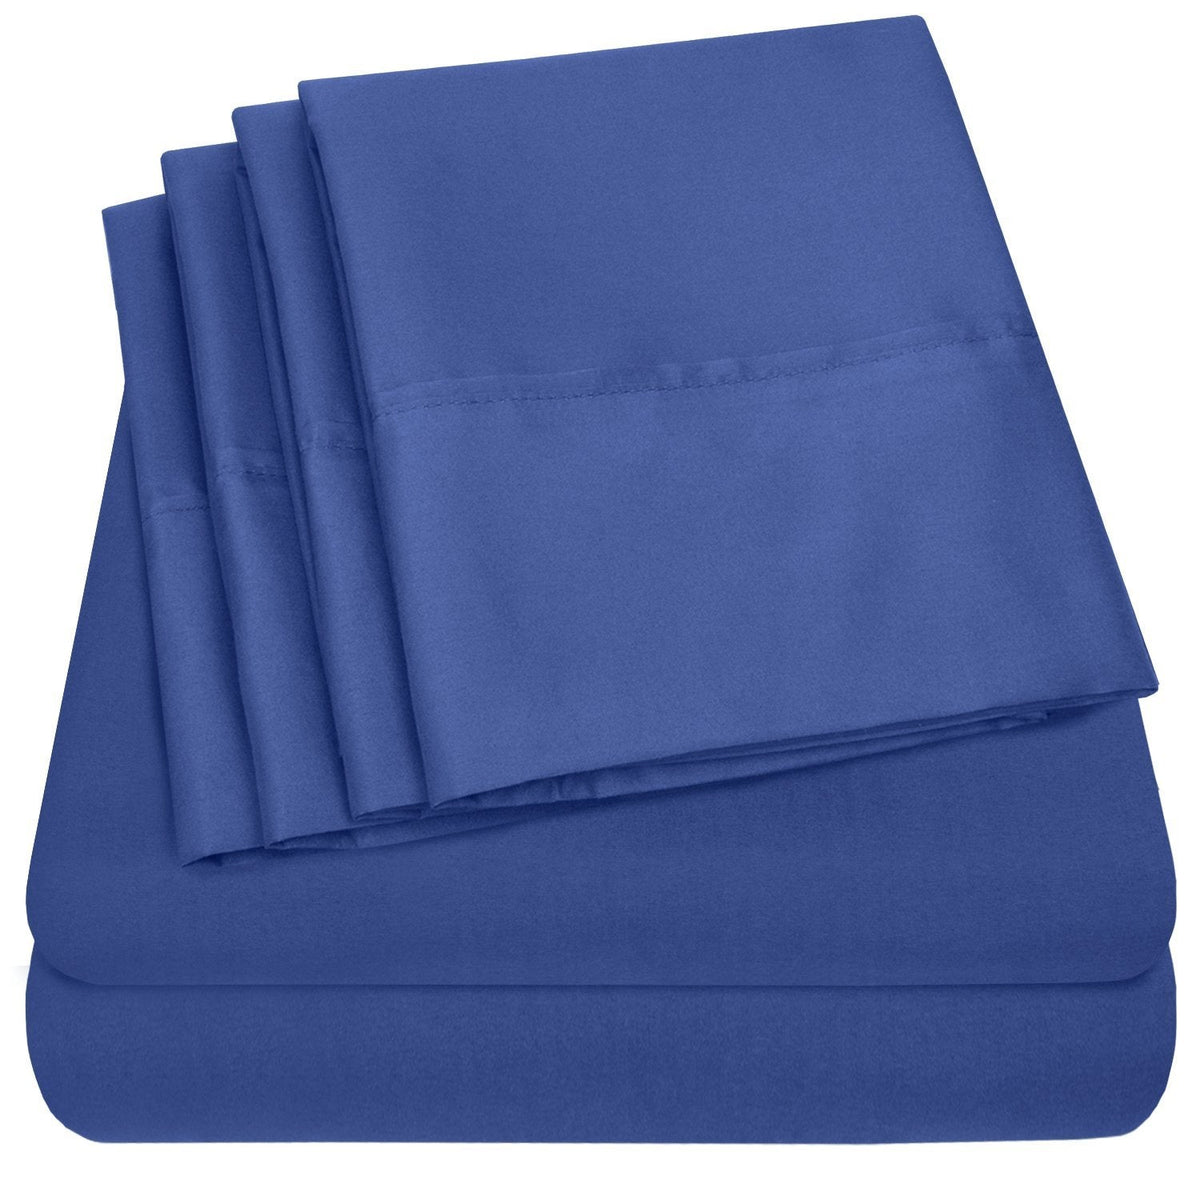 Deluxe 6-Piece Bed Sheet Set (Royal Blue) - Folded